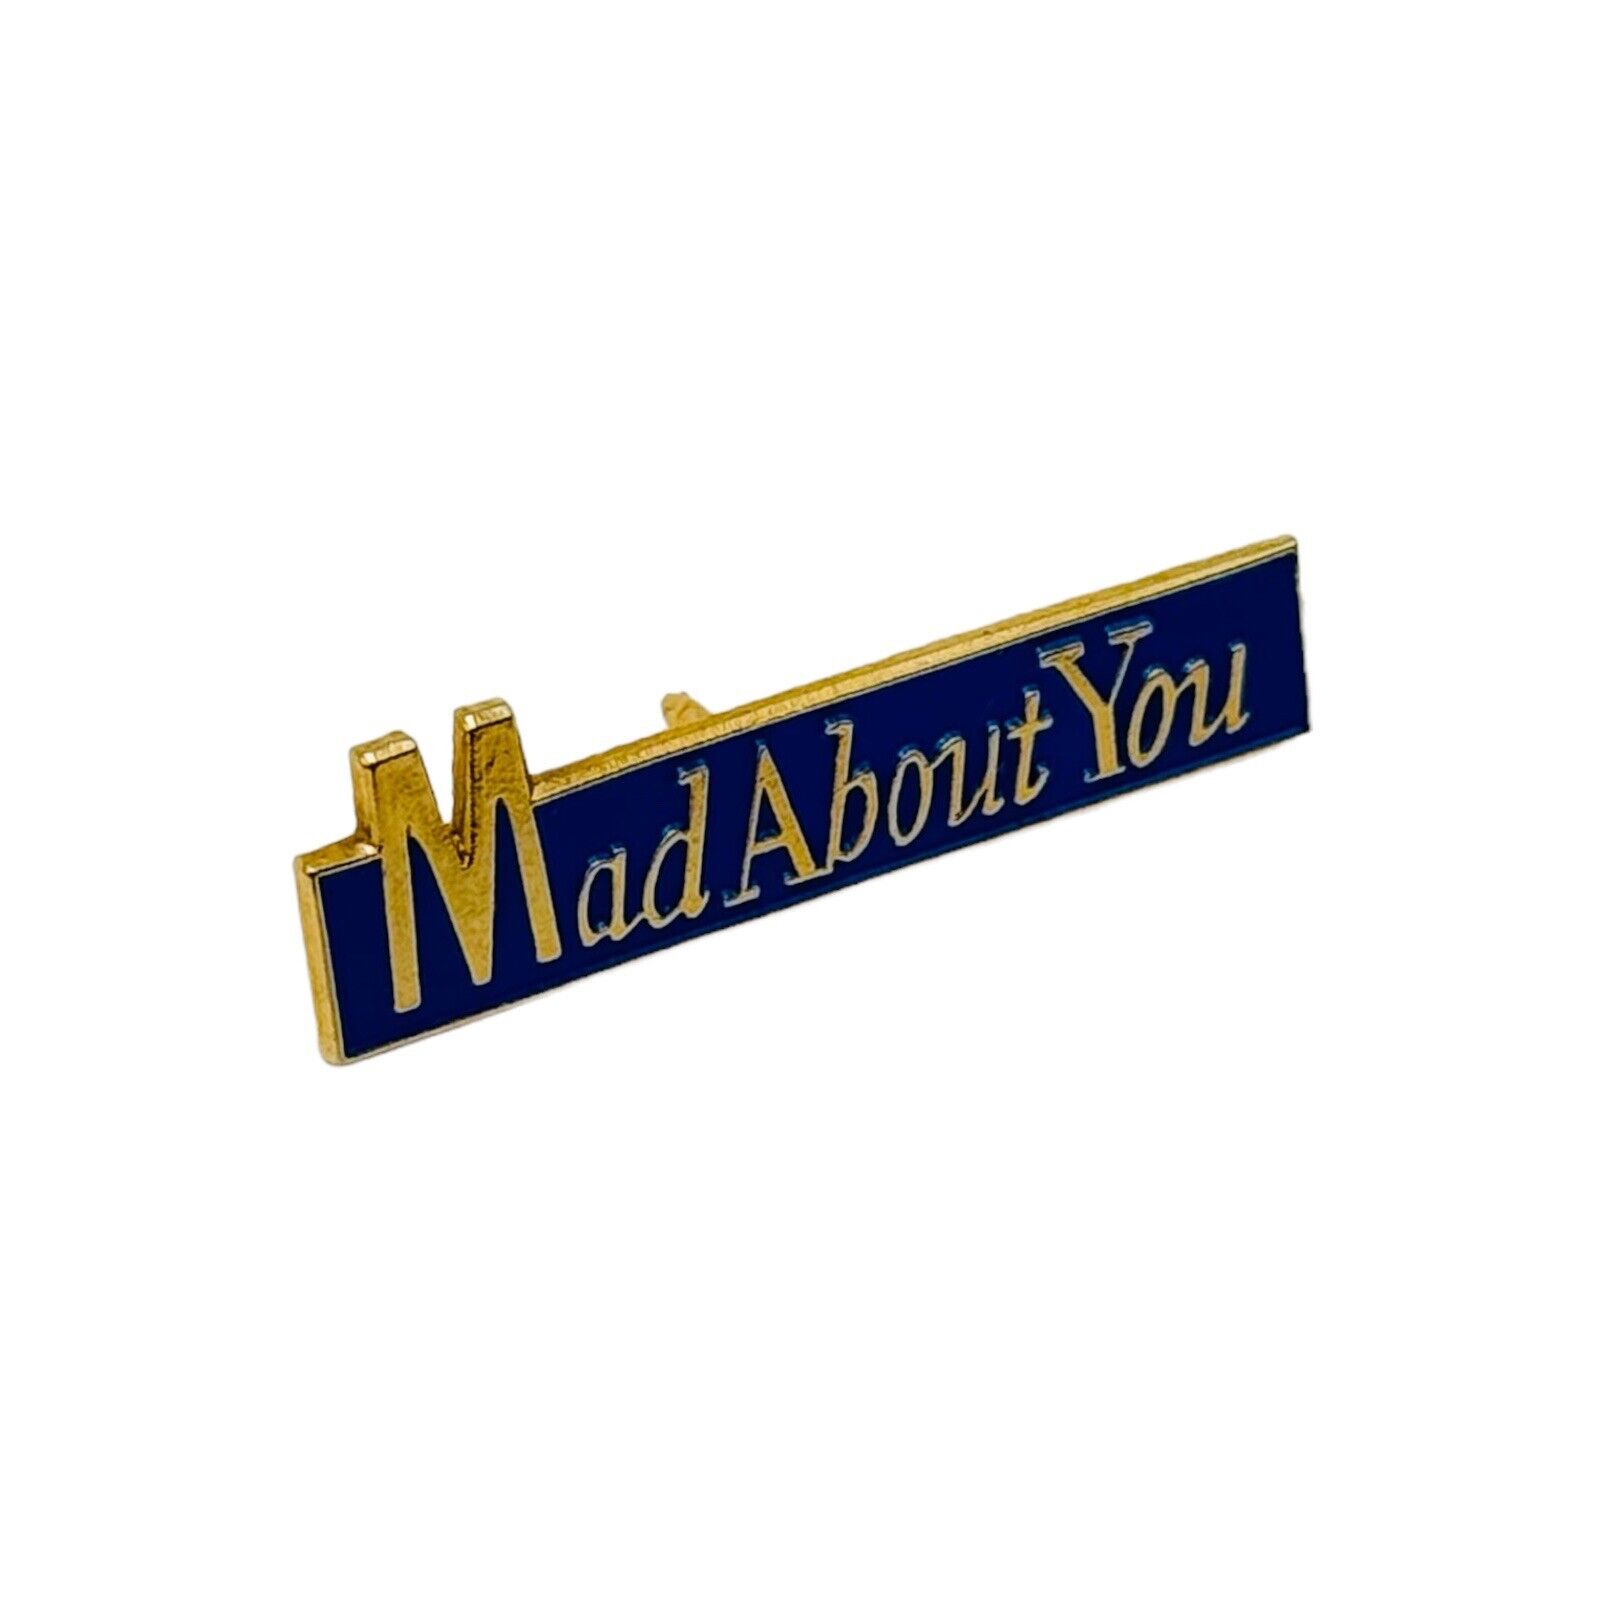 Mad About You TV Advertisement Collectible Pin RARE